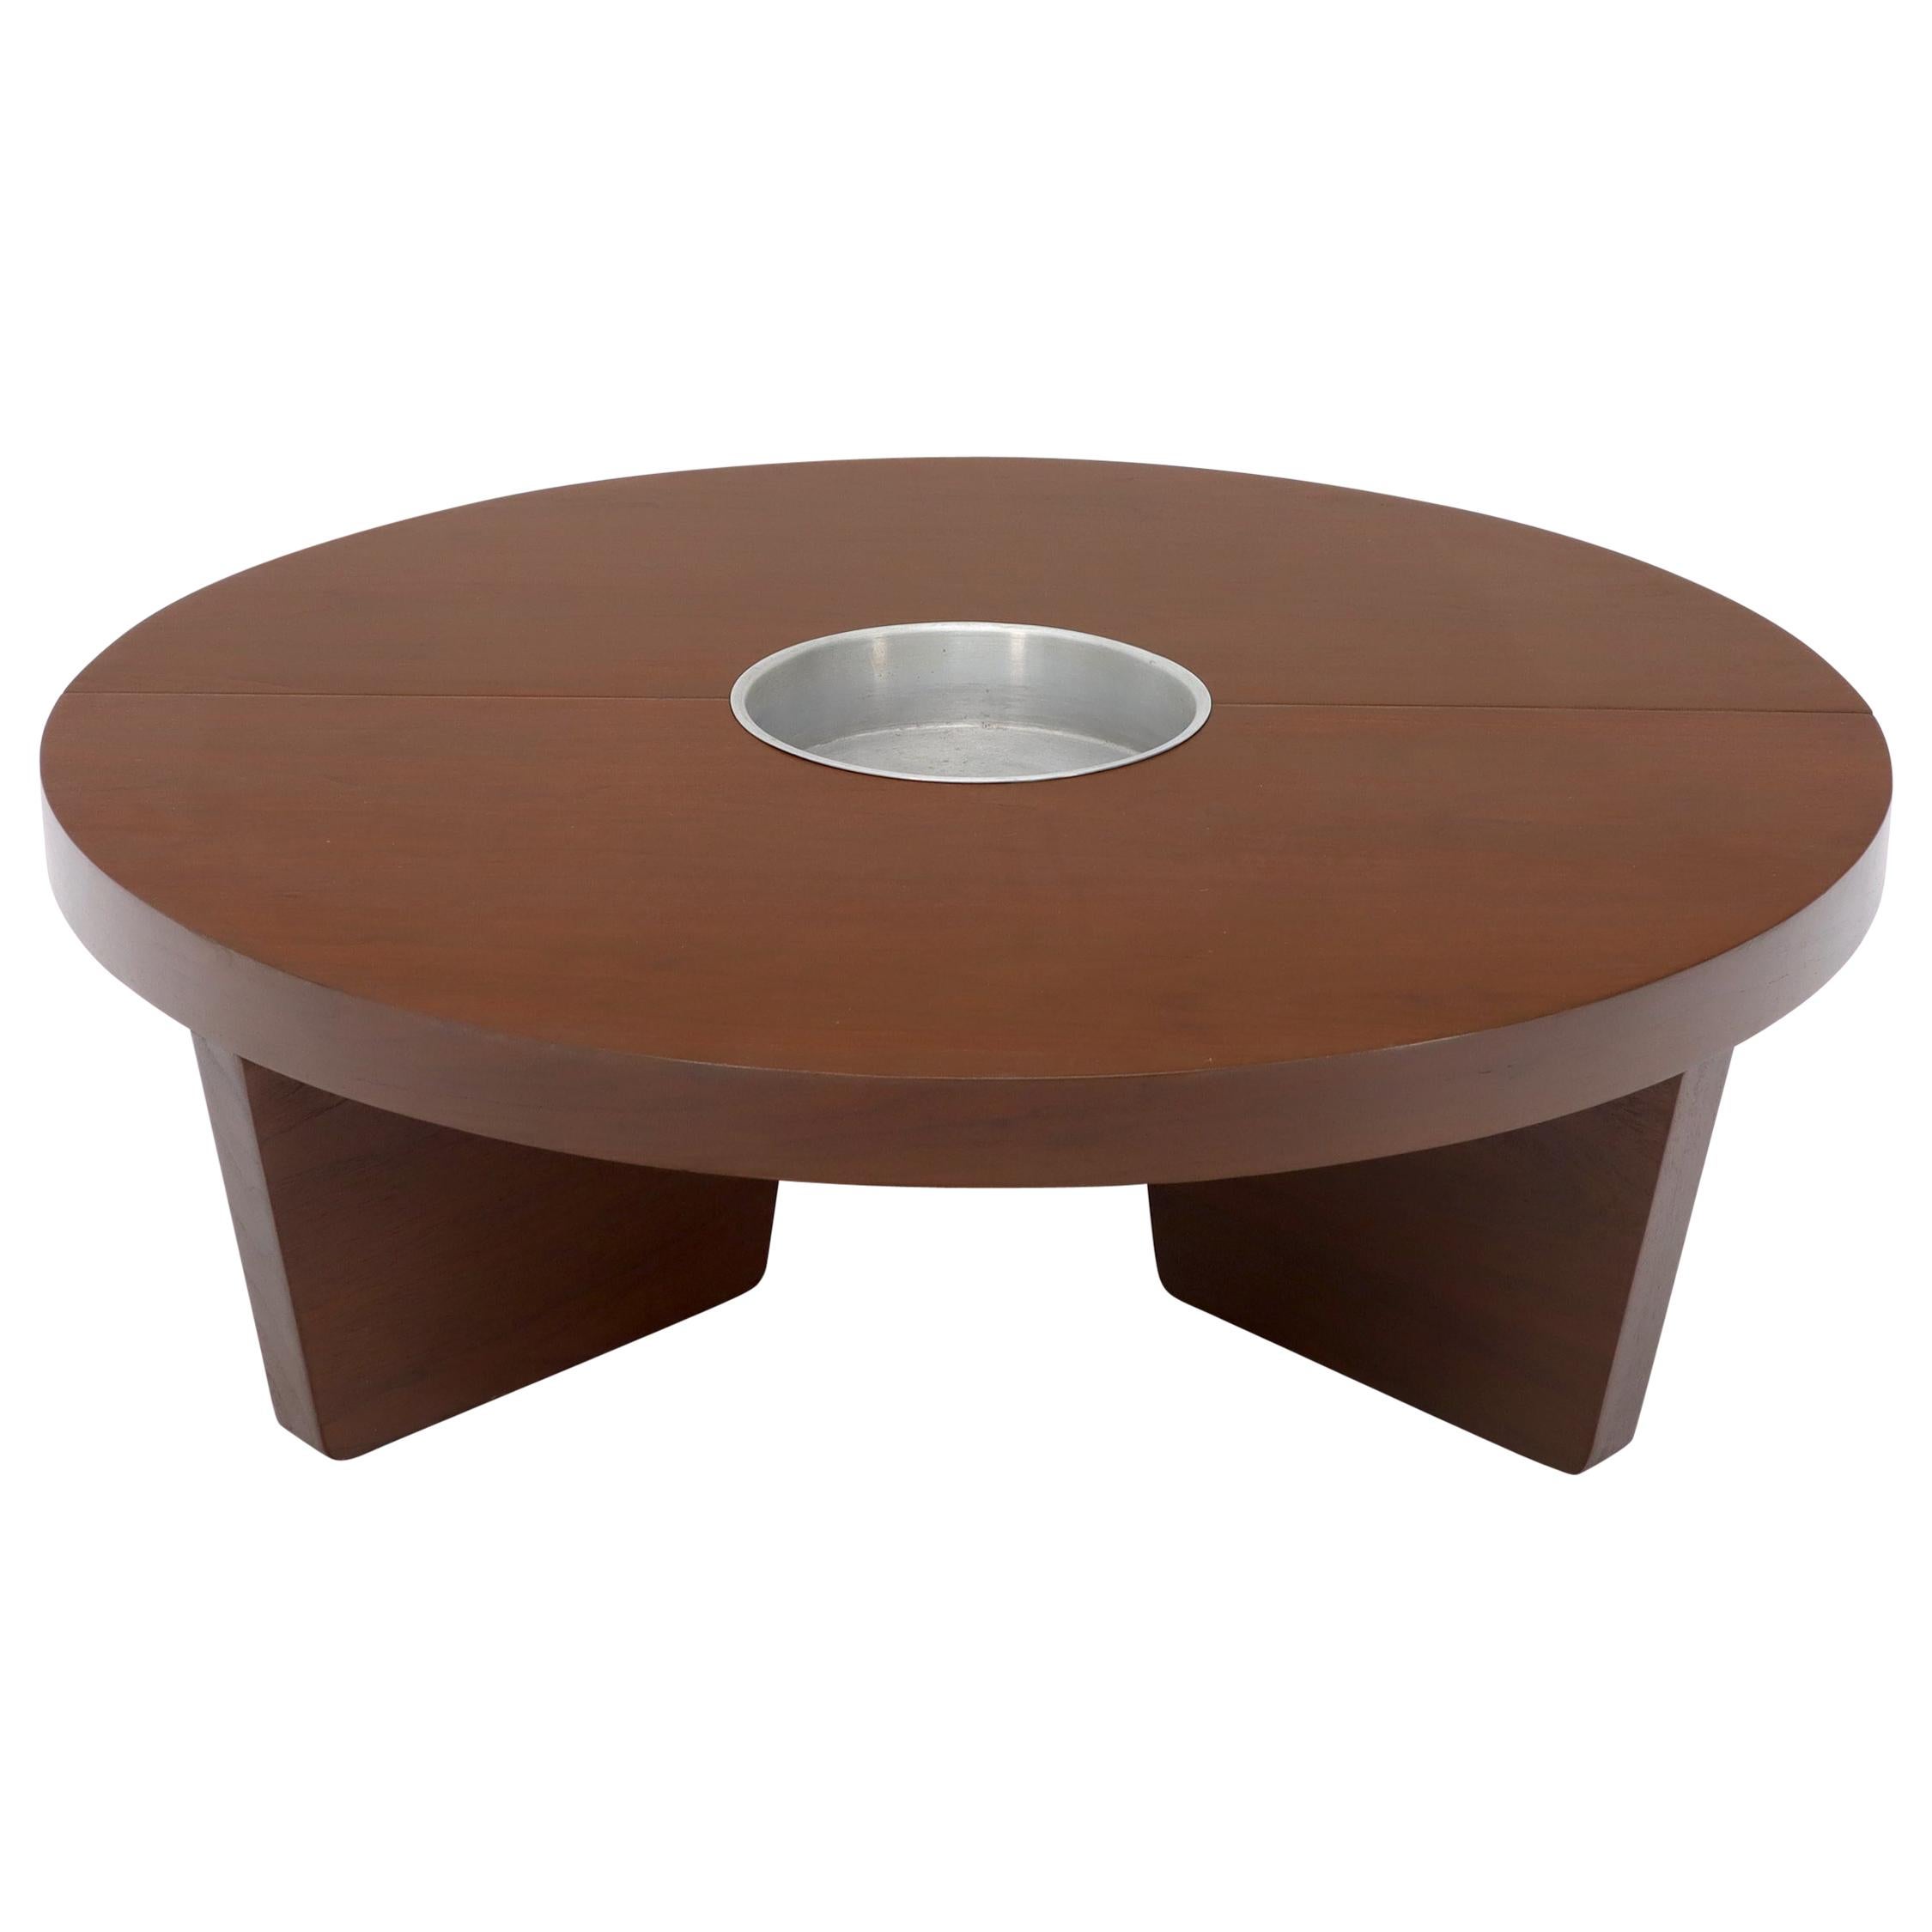 Harvey Probber Round Split Circle Nuclear Coffee Table with Planter